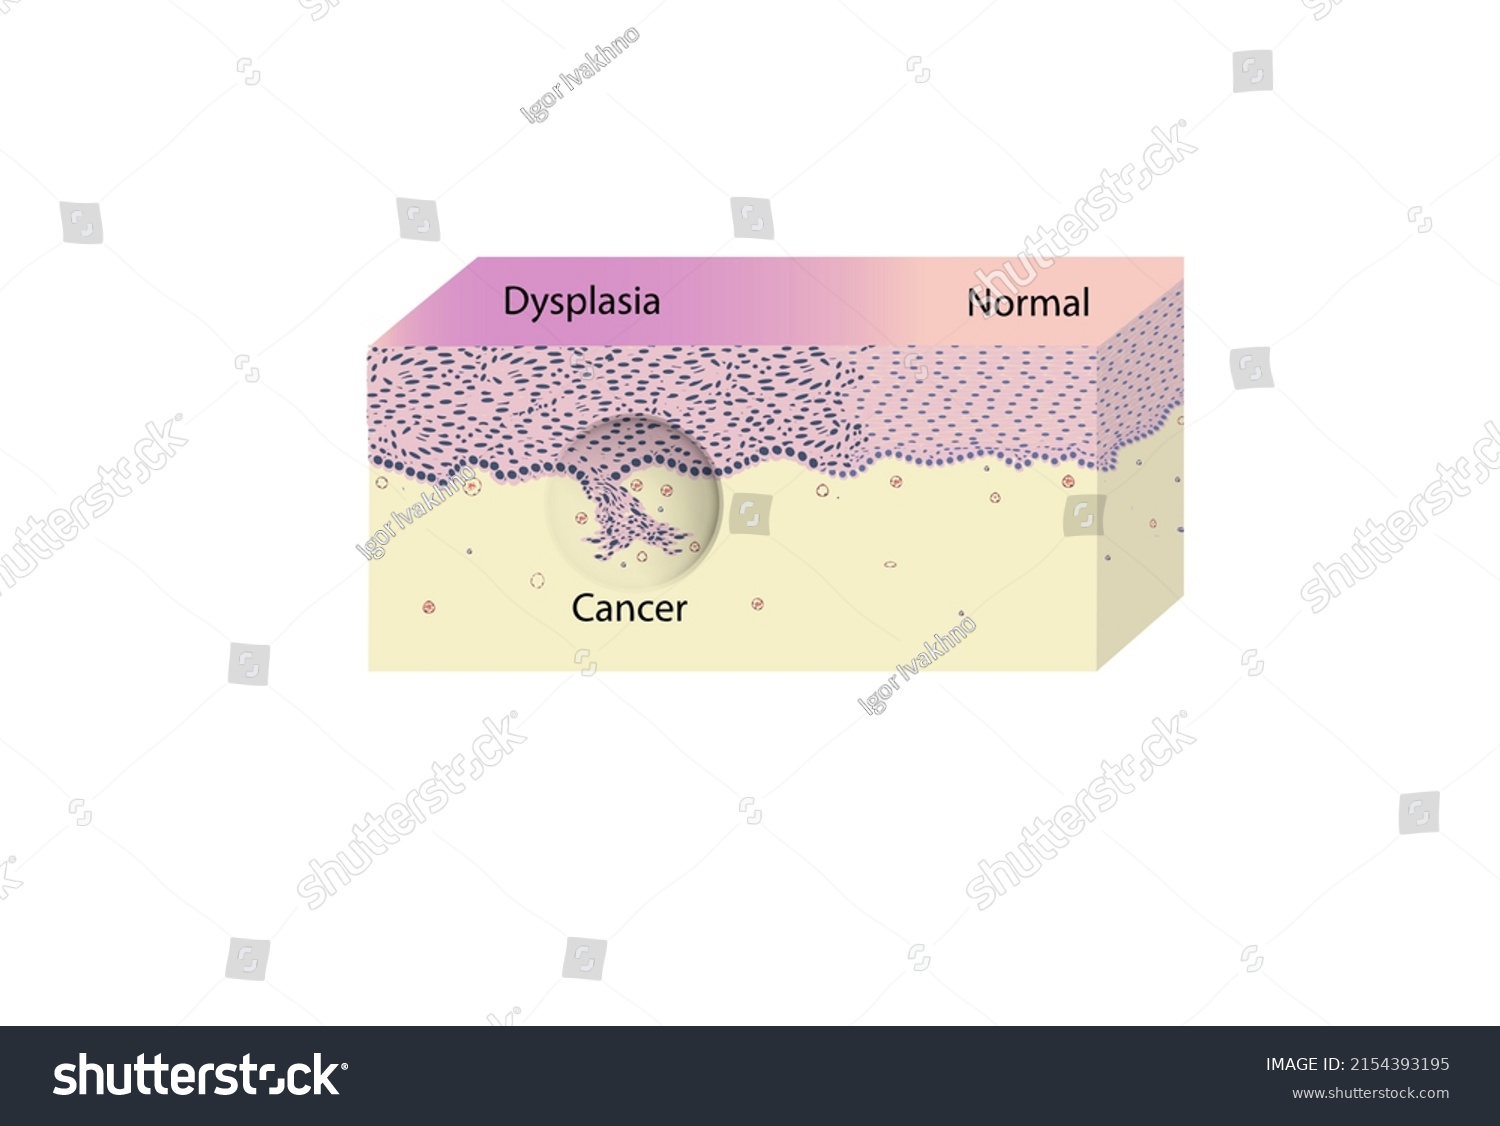 Morphology Cervical Cancer Dysplasia Under Microscope Stock Vector Royalty Free 2154393195 